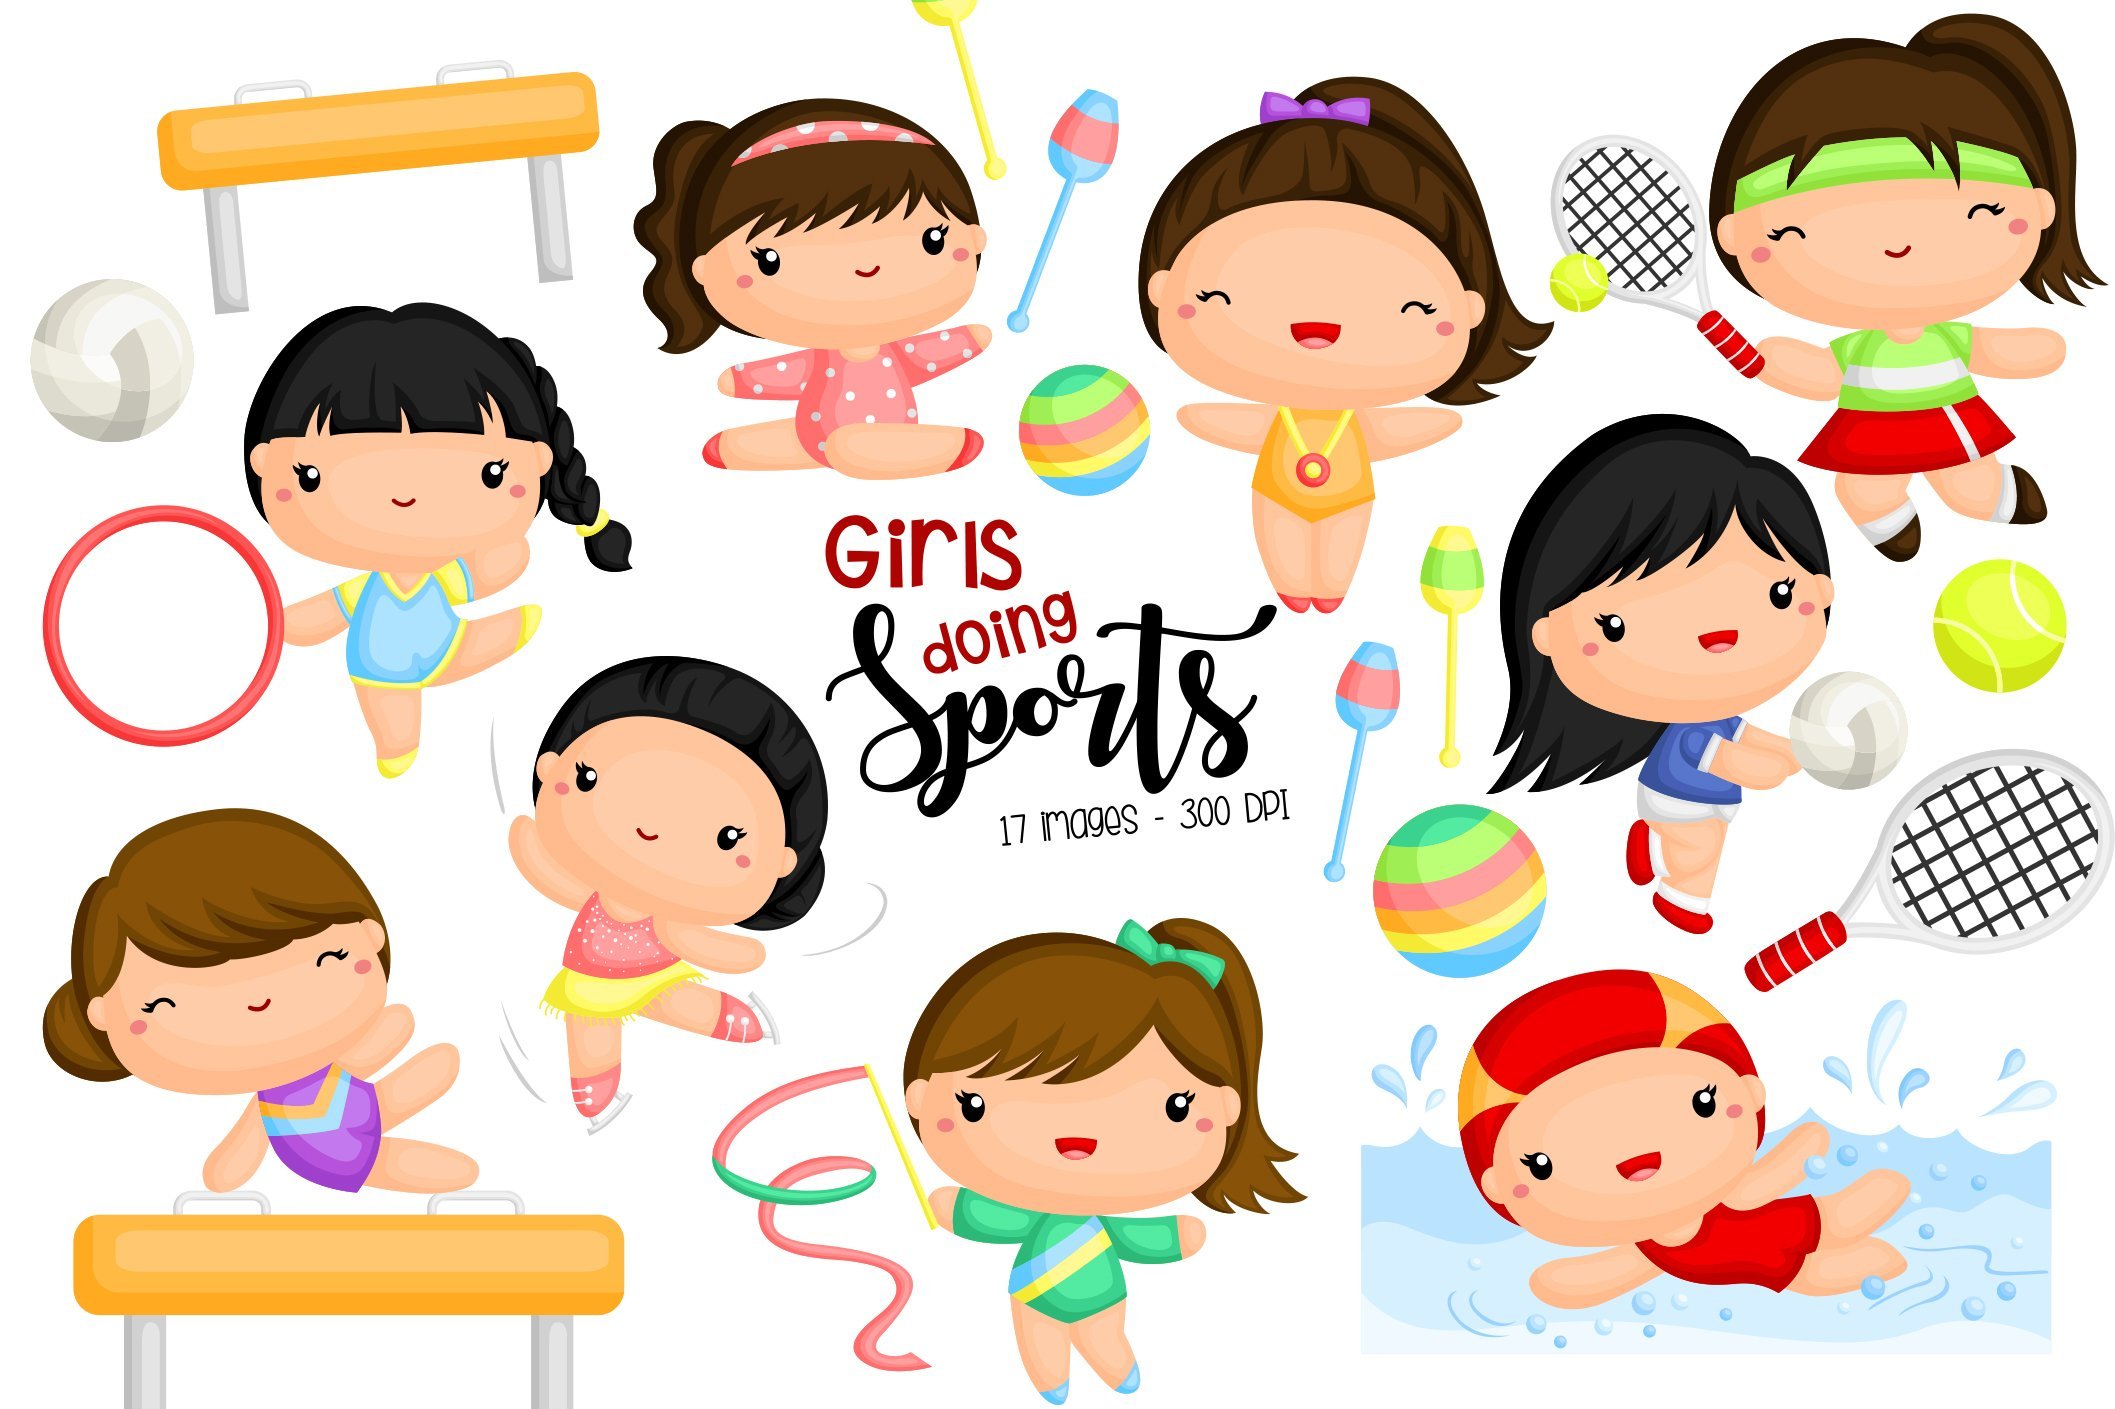 Girl Sports Clipart - Healthy cover image.